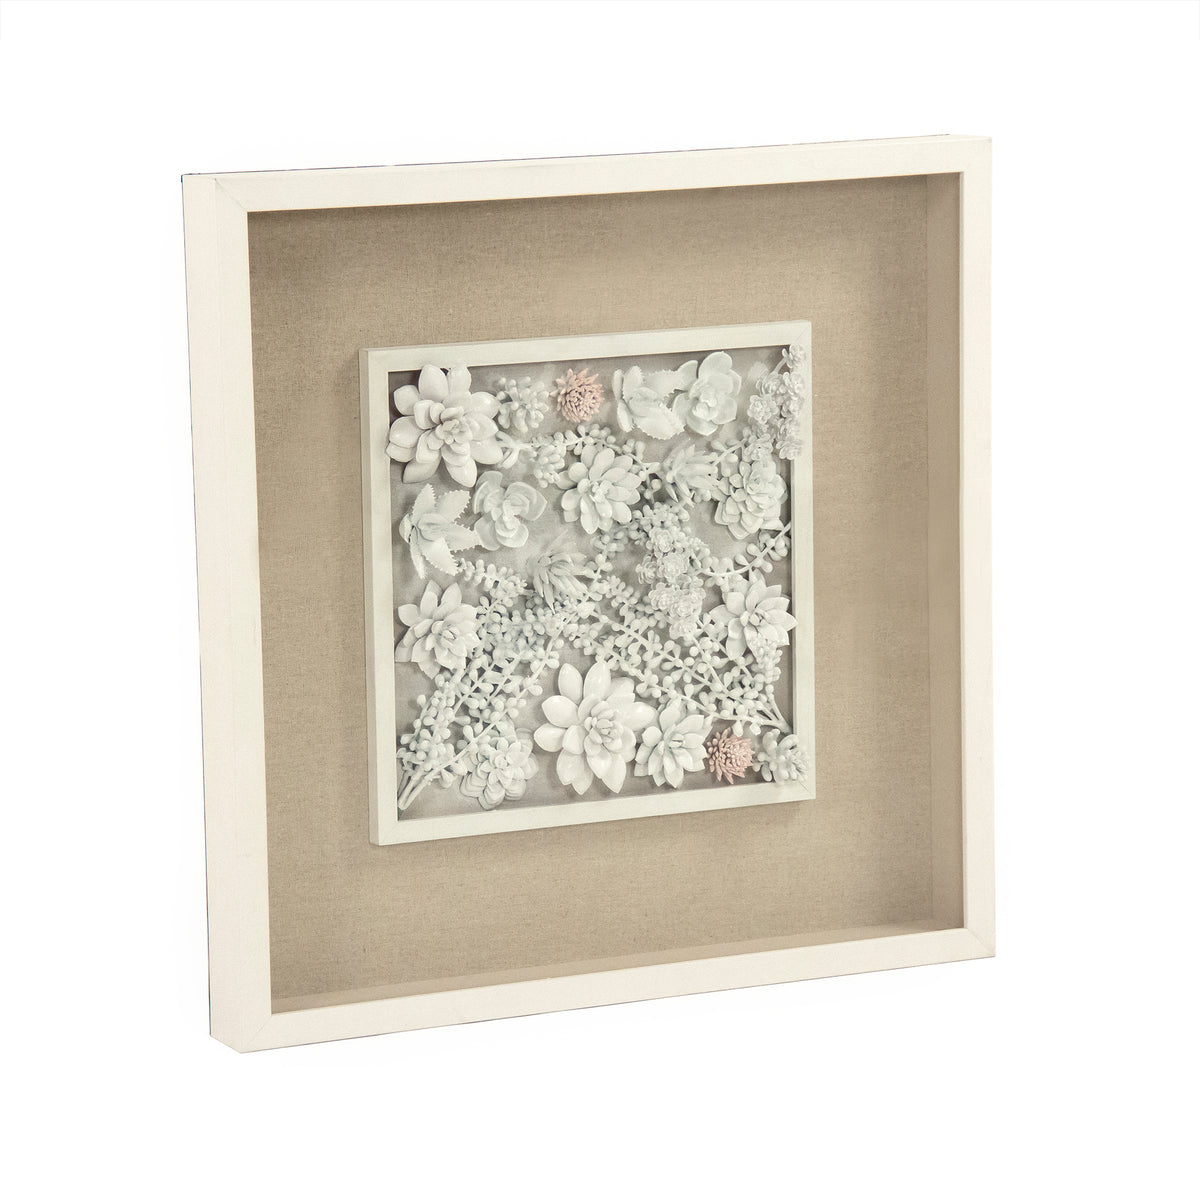 Abstract Ceramic Botanical Wall Art by Zentique